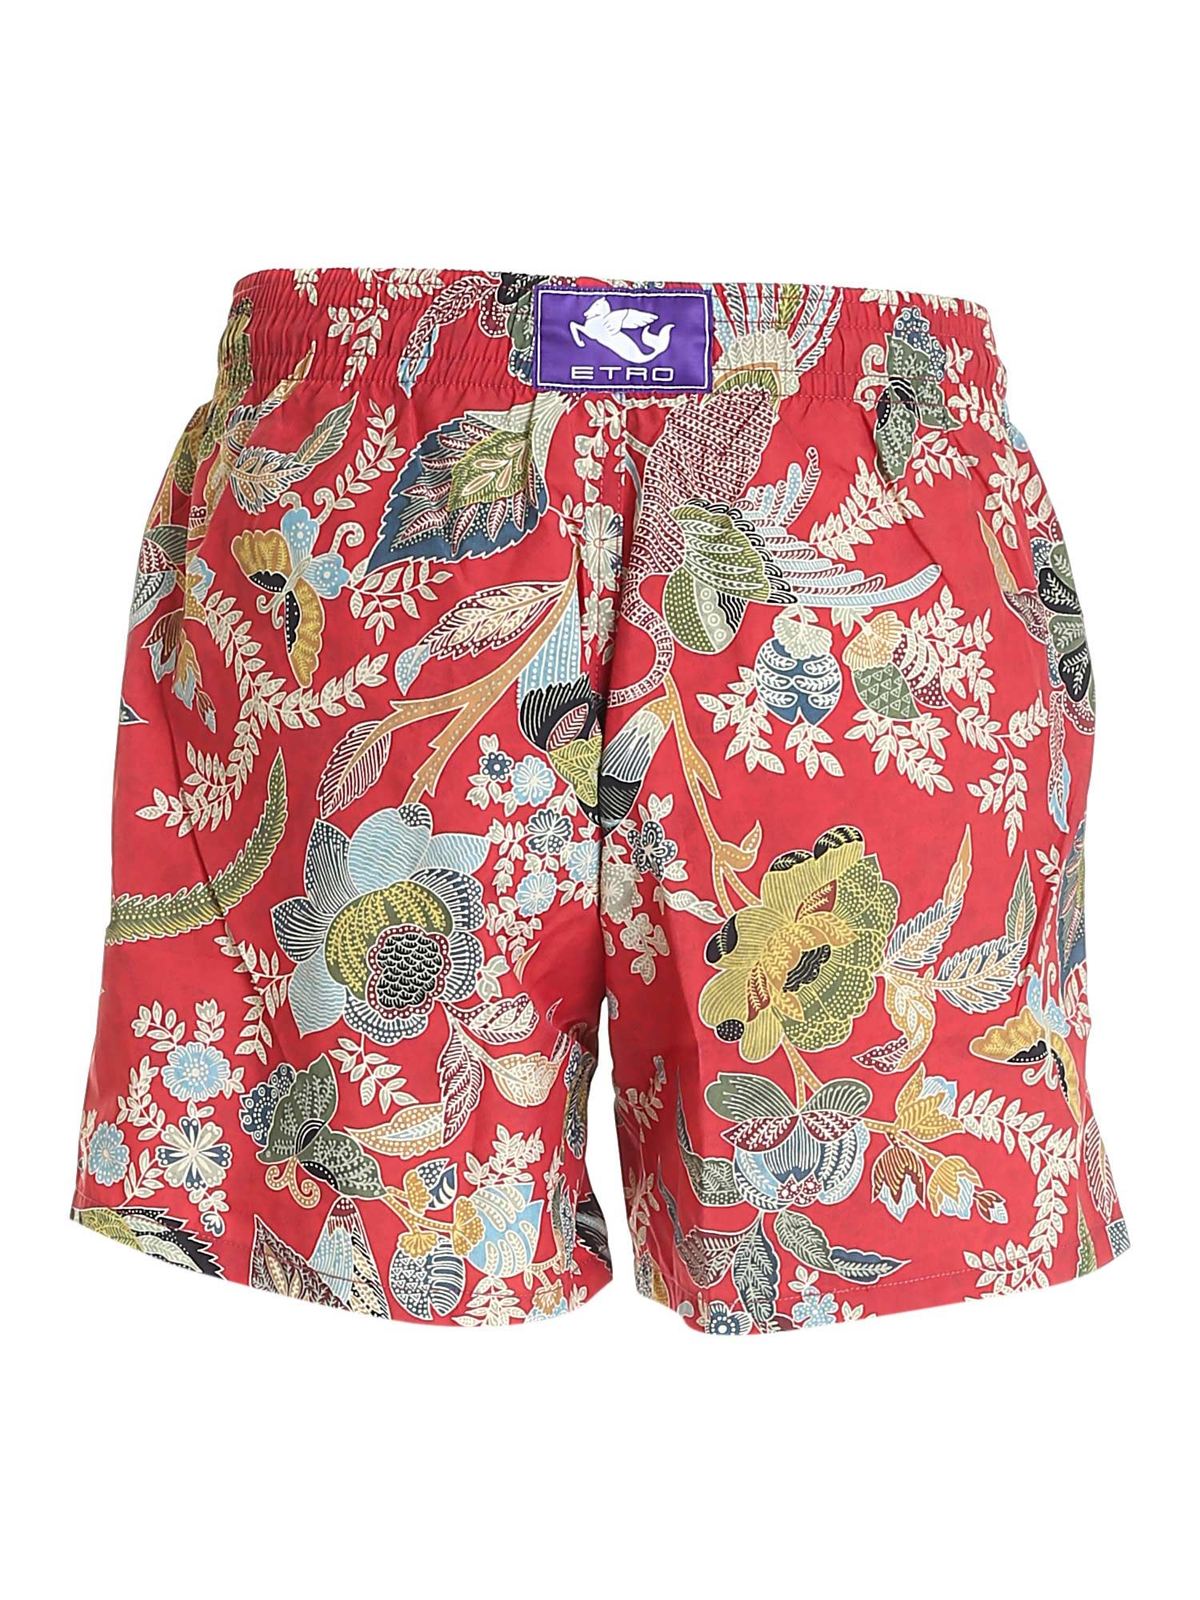 Floral print swim trunks in red